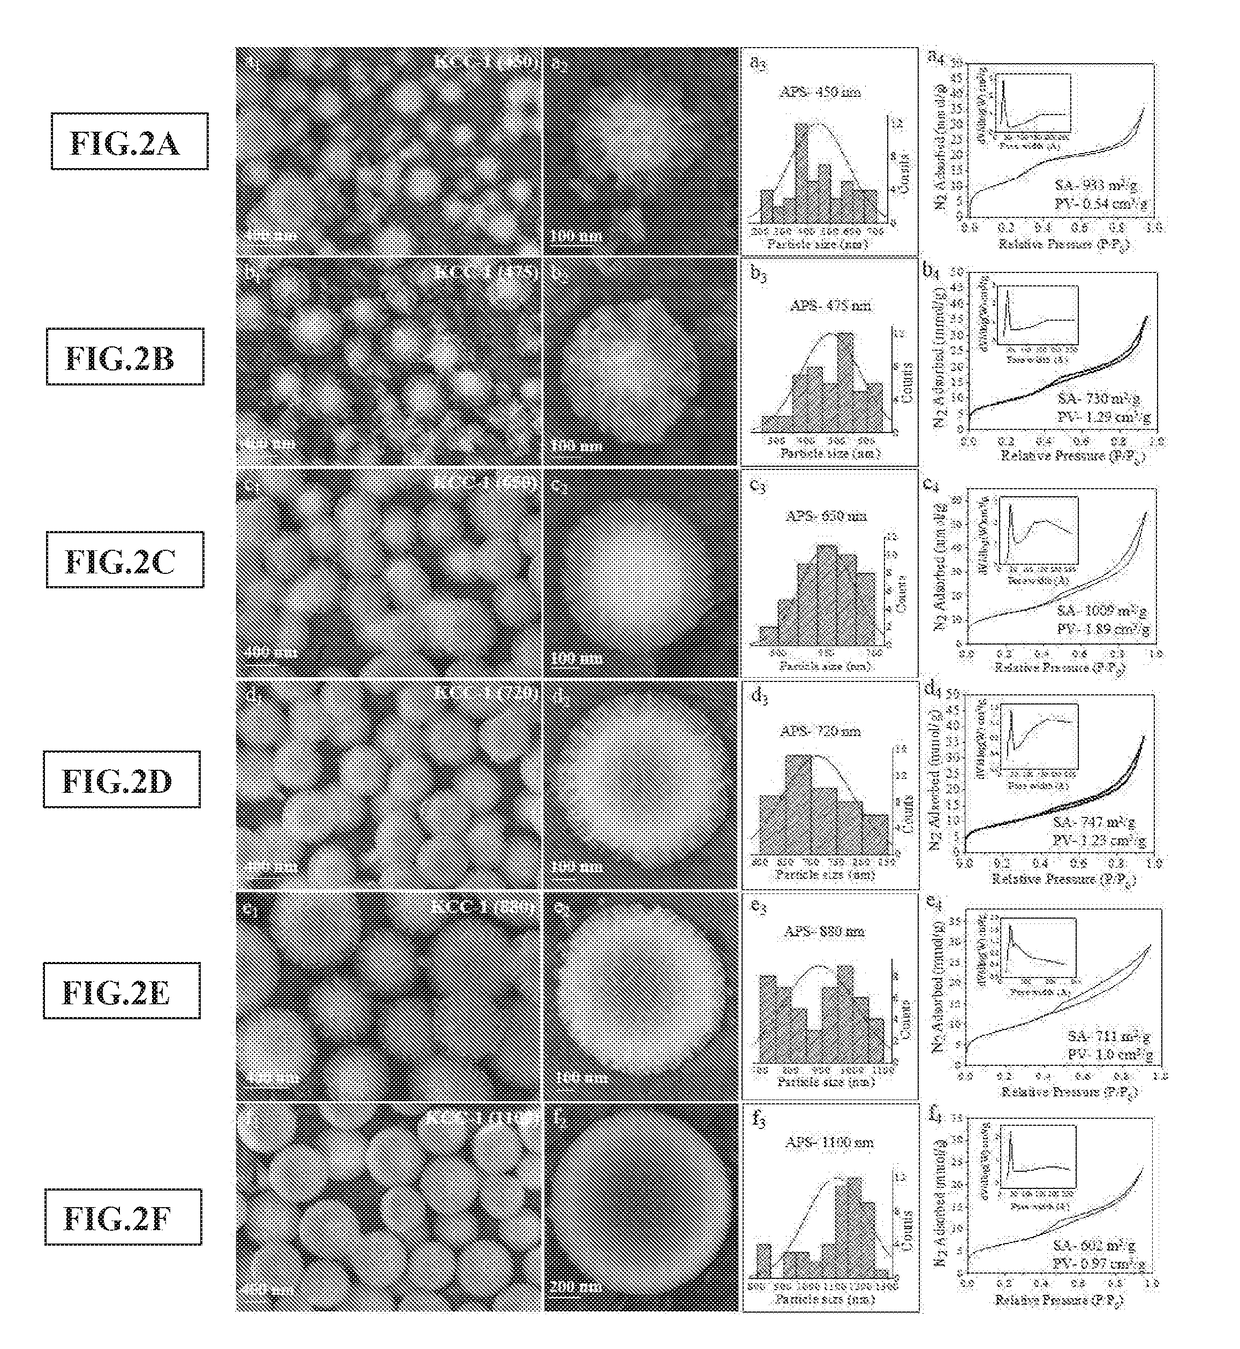 Synthesis of fibrous nano-silica spheres with controlled particle size, fibre density, and various textural properties